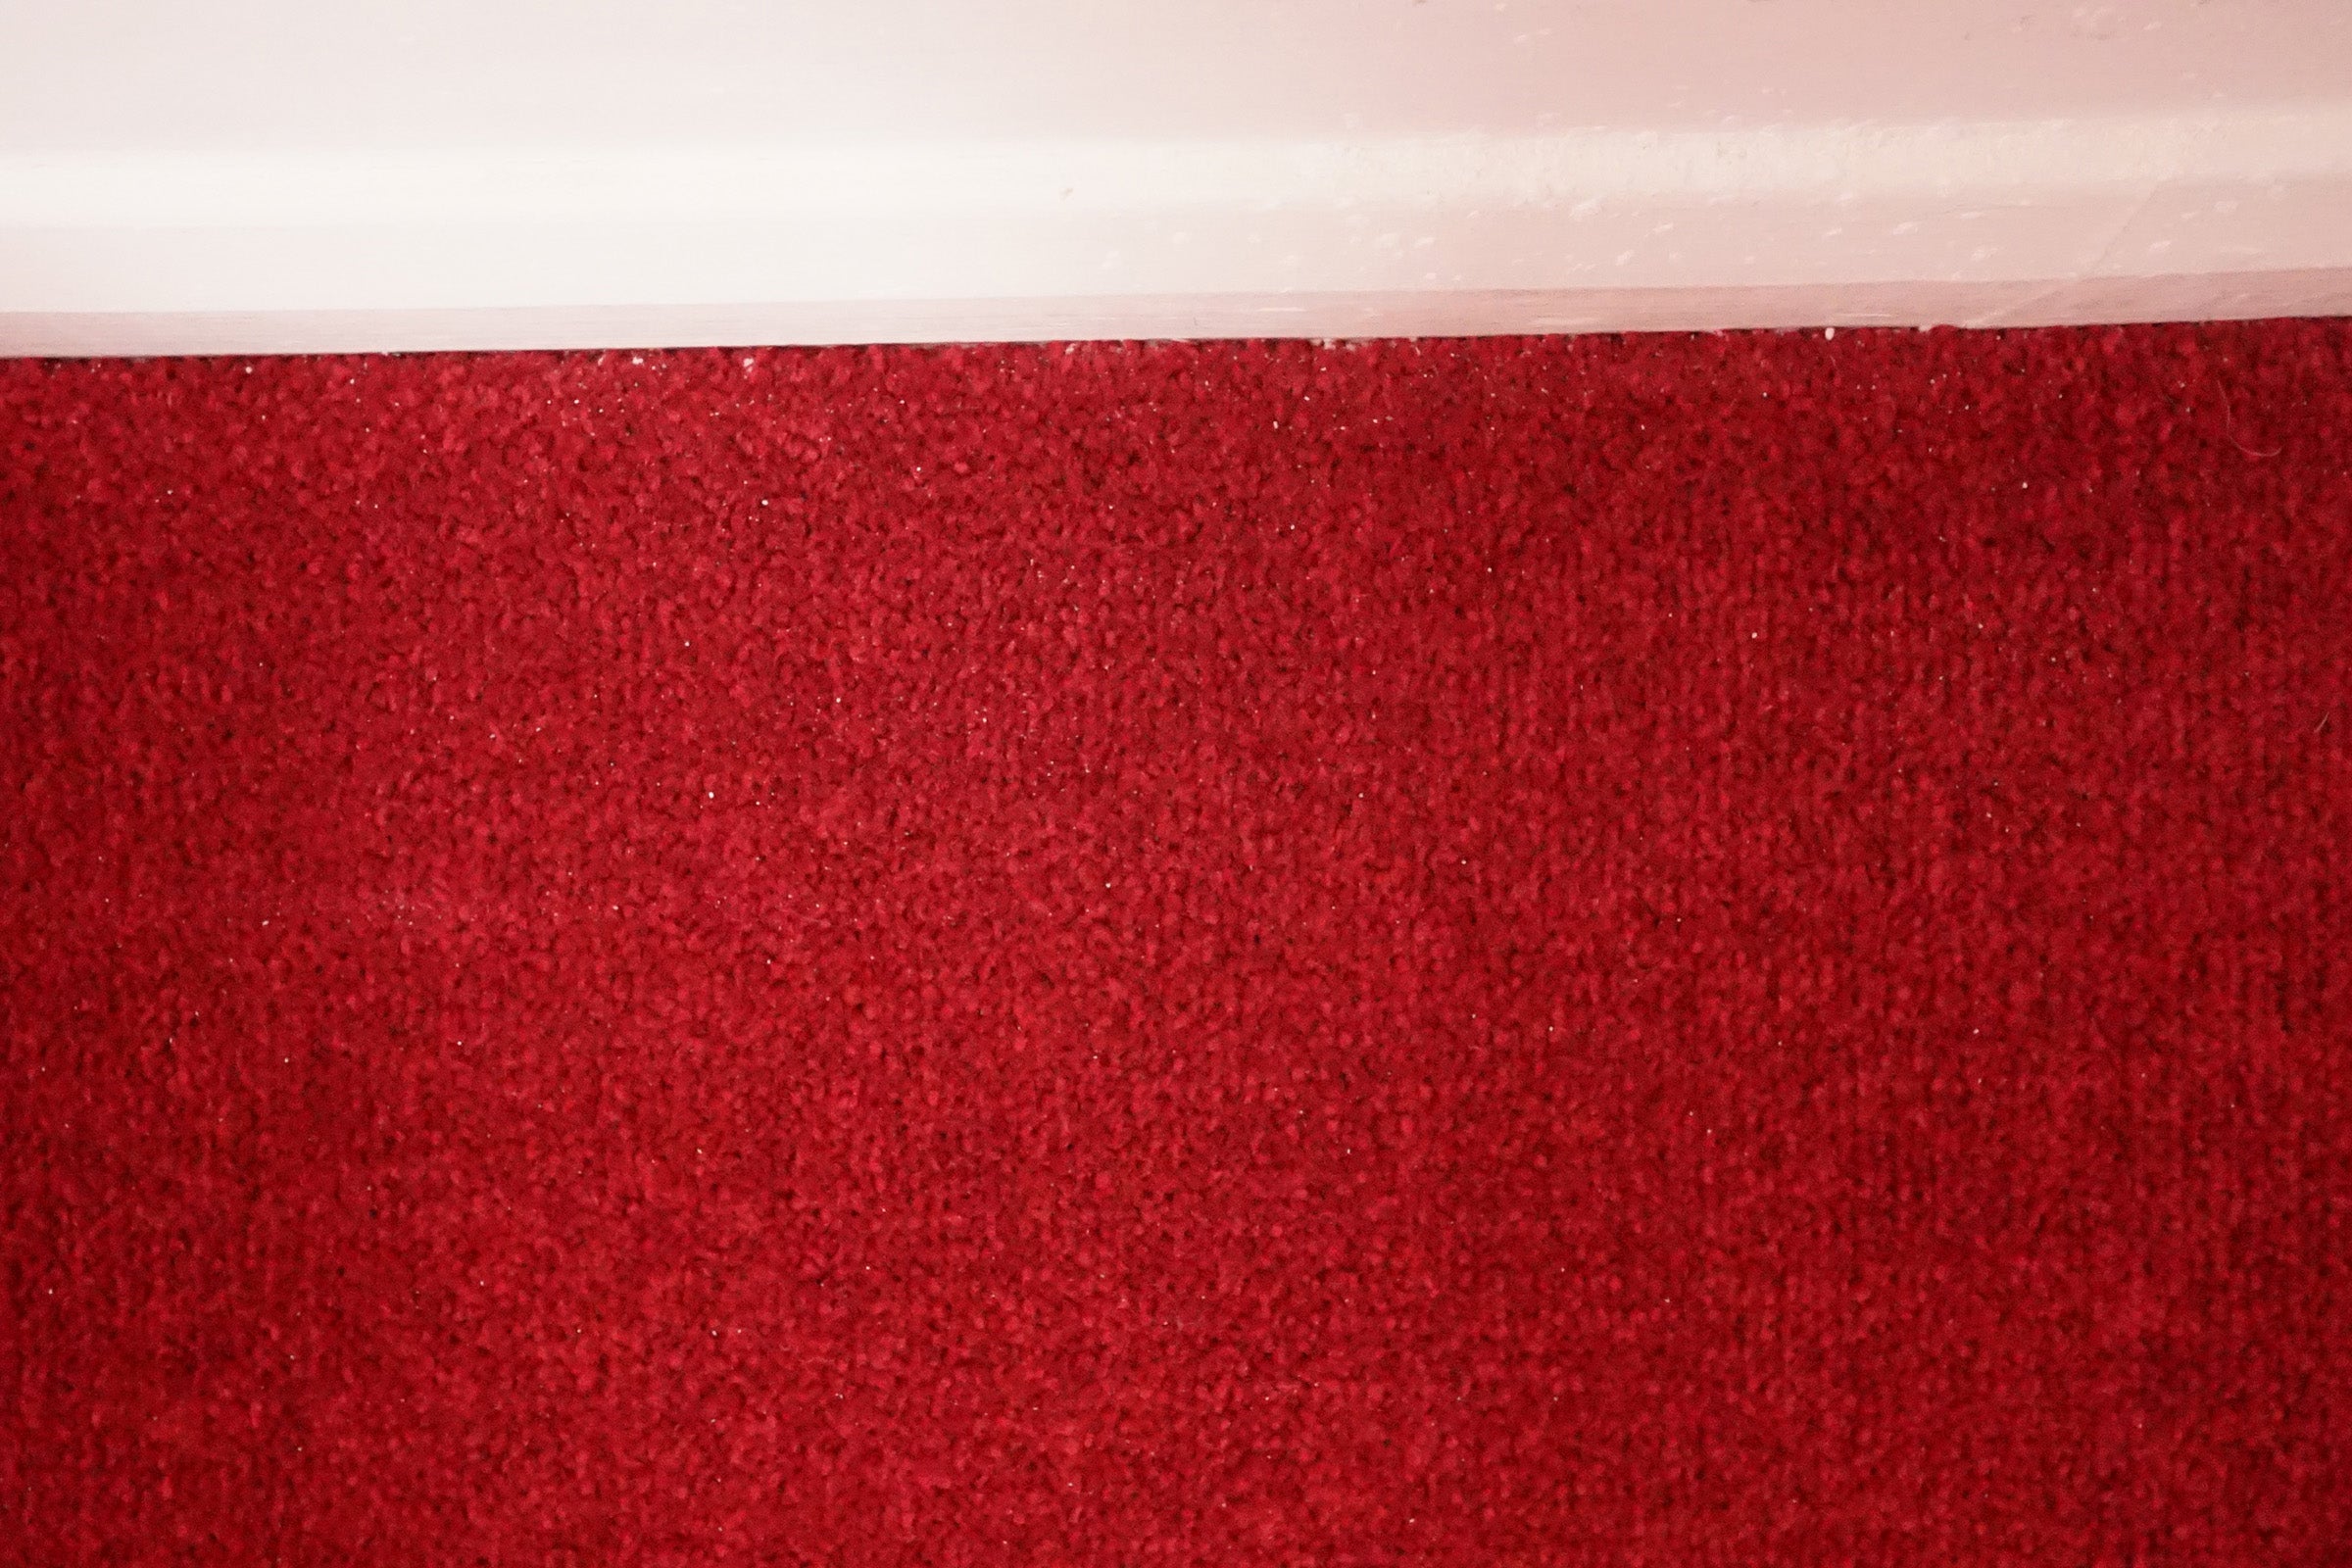 Close-up of a clean red carpet edge after vacuuming.